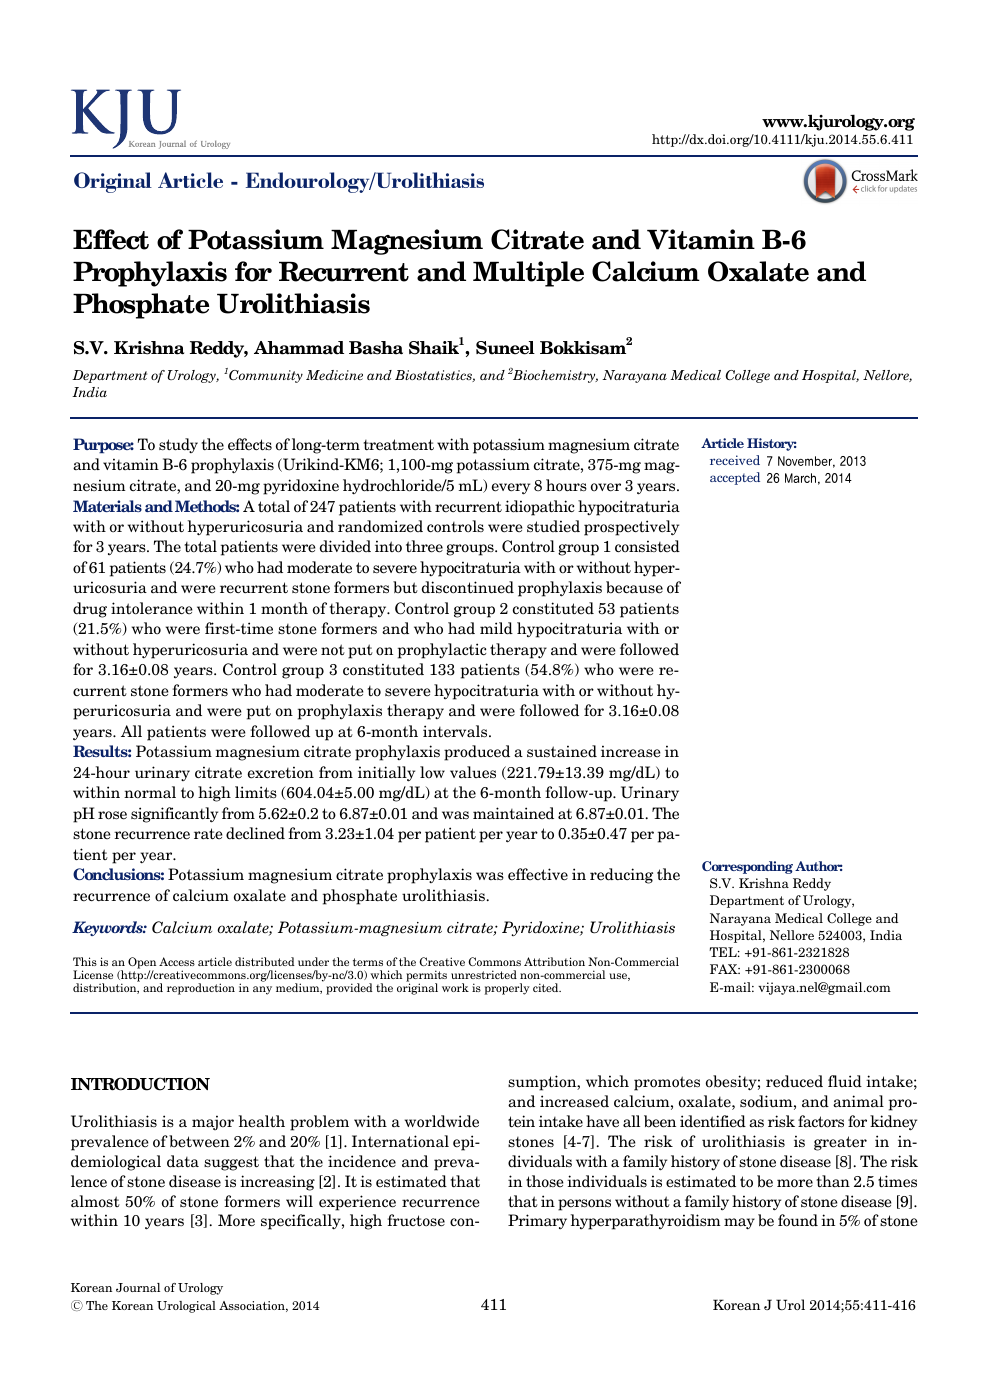 Effect Of Potassium Magnesium Citrate And Vitamin B 6 Prophylaxis For Recurrent And Multiple Calcium Oxalate And Phosphate Urolithiasis Topic Of Research Paper In Clinical Medicine Download Scholarly Article Pdf And Read